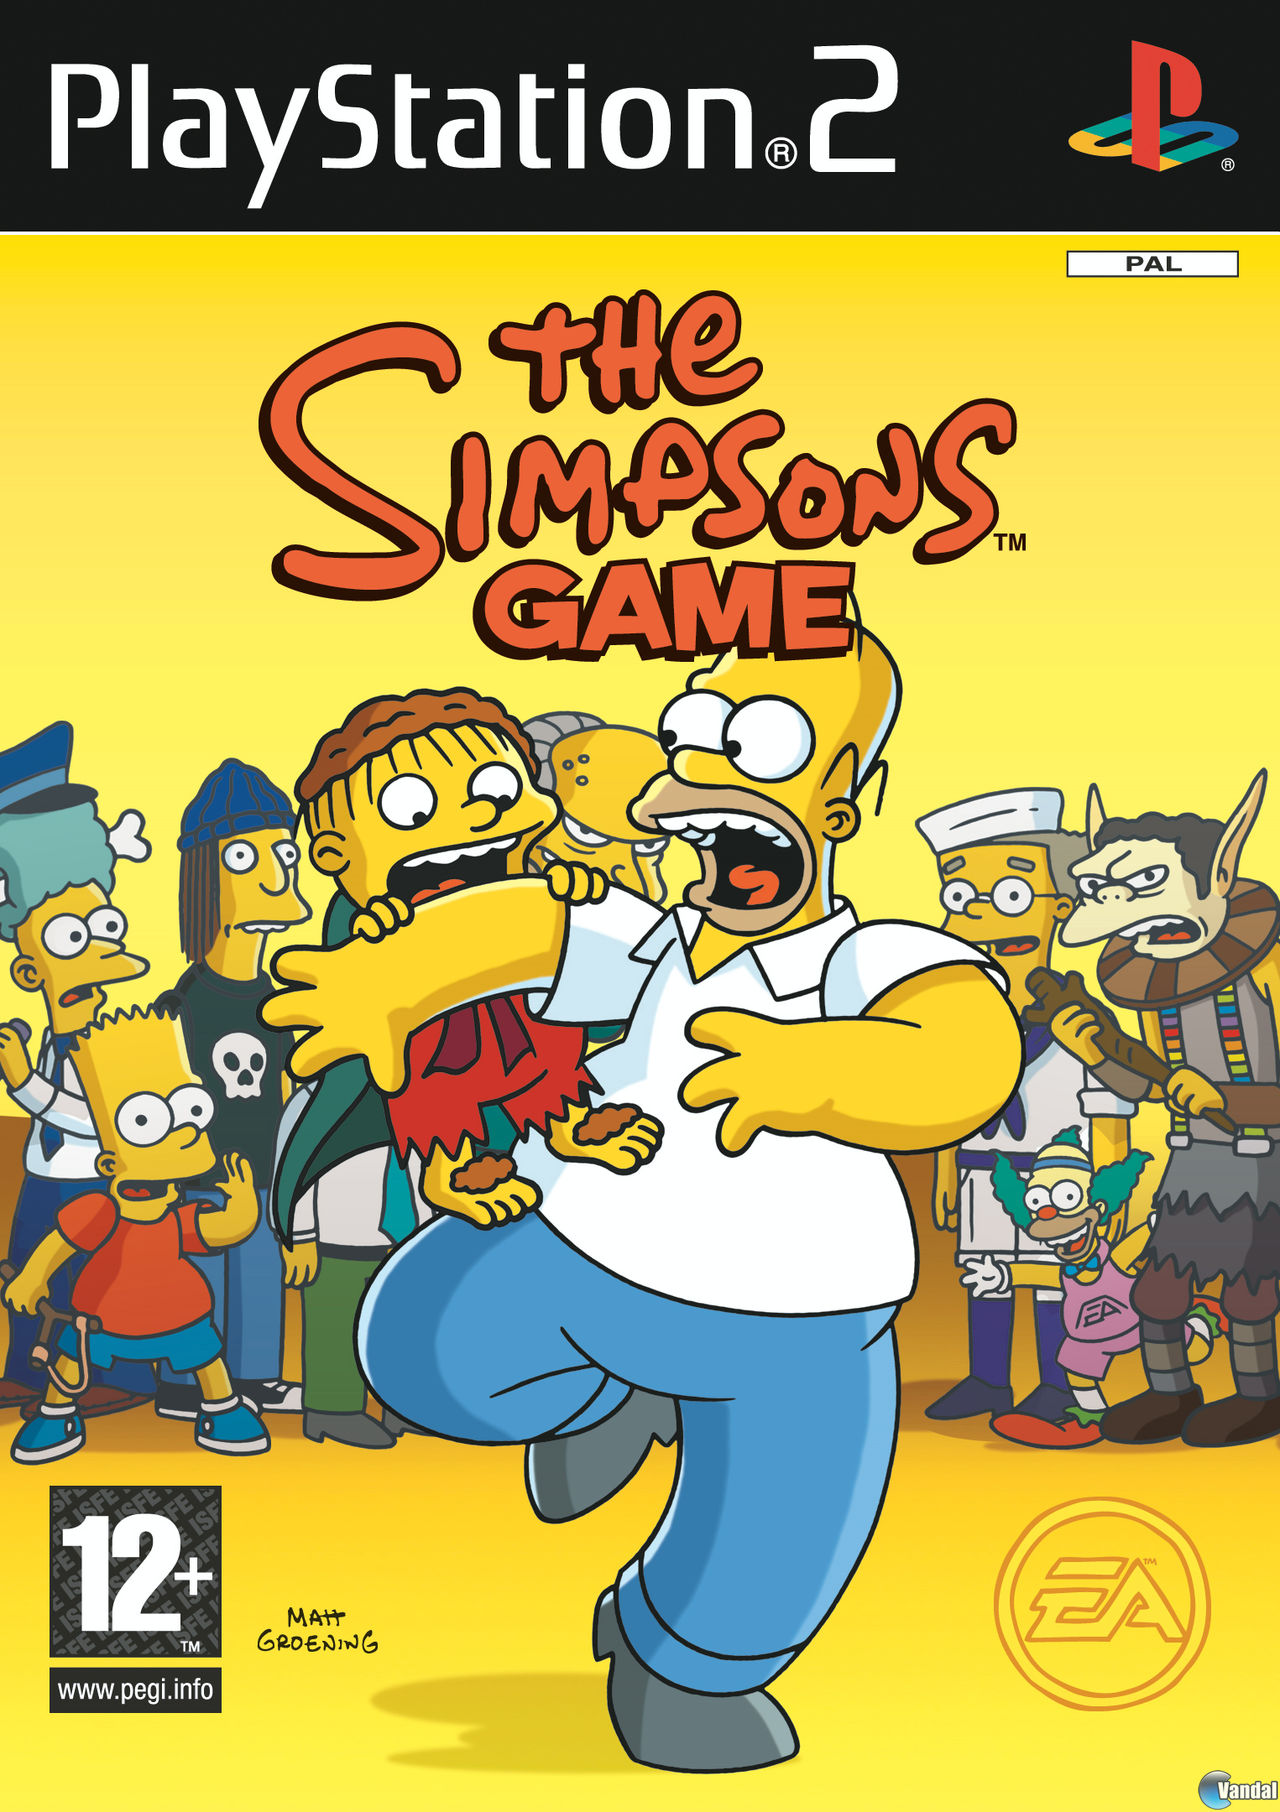 the simpsons video game for psp